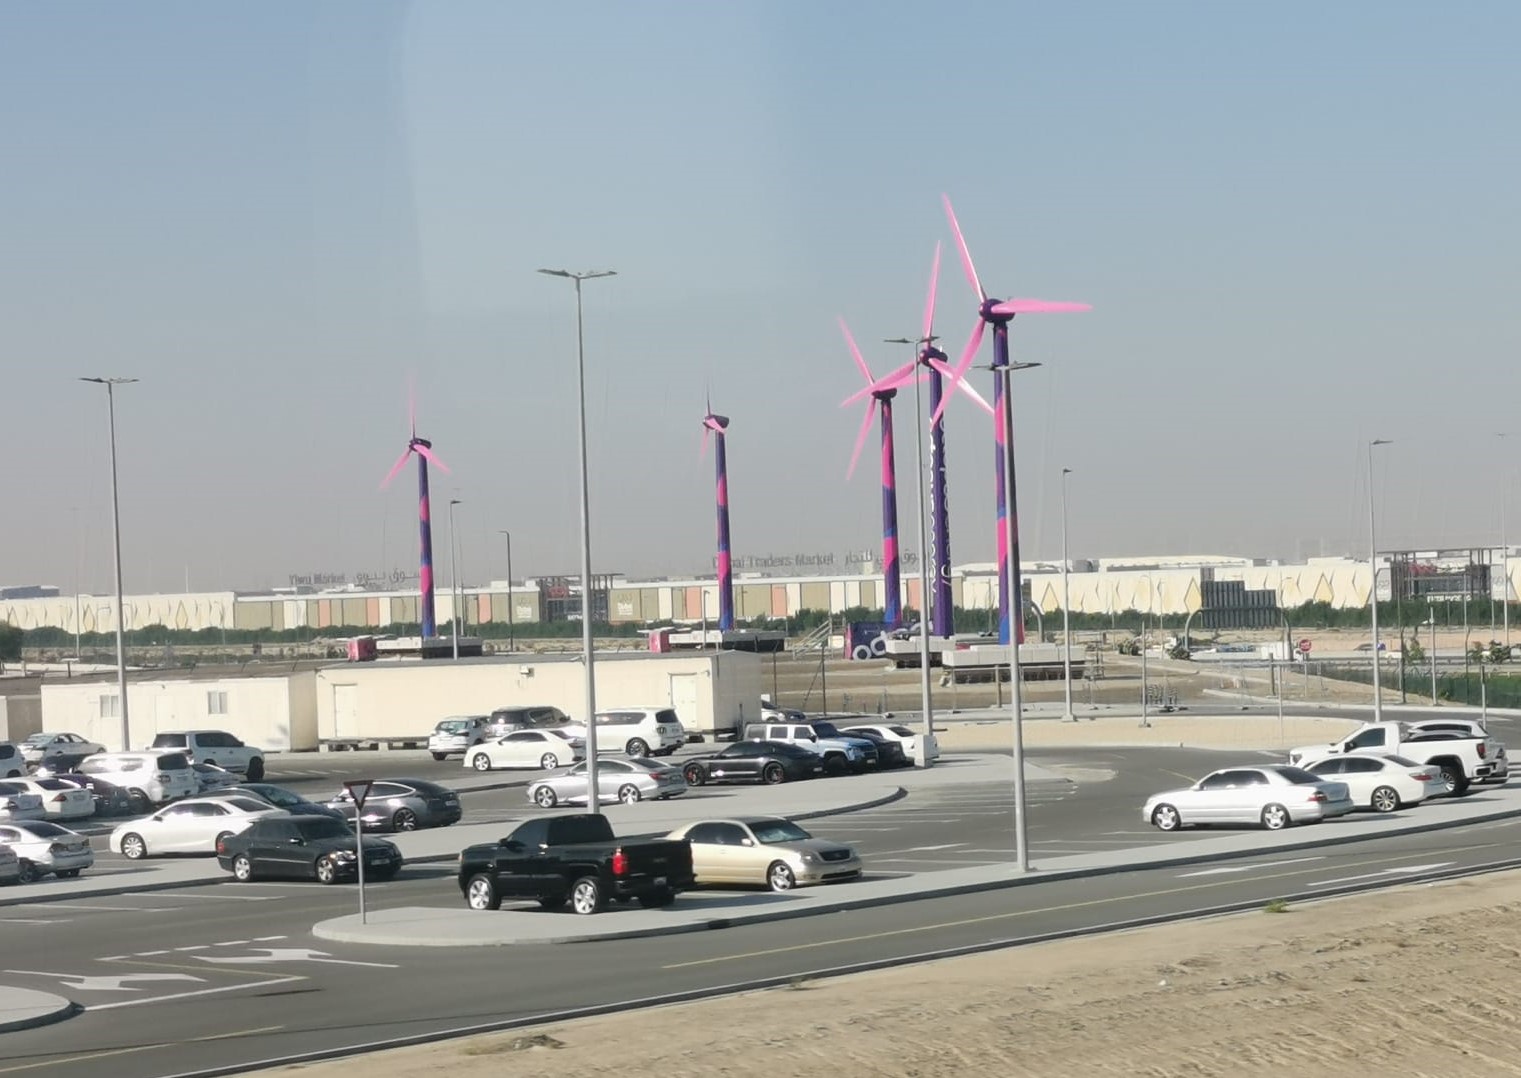 wind turbines painted pink in the United Arab Emirates landscape